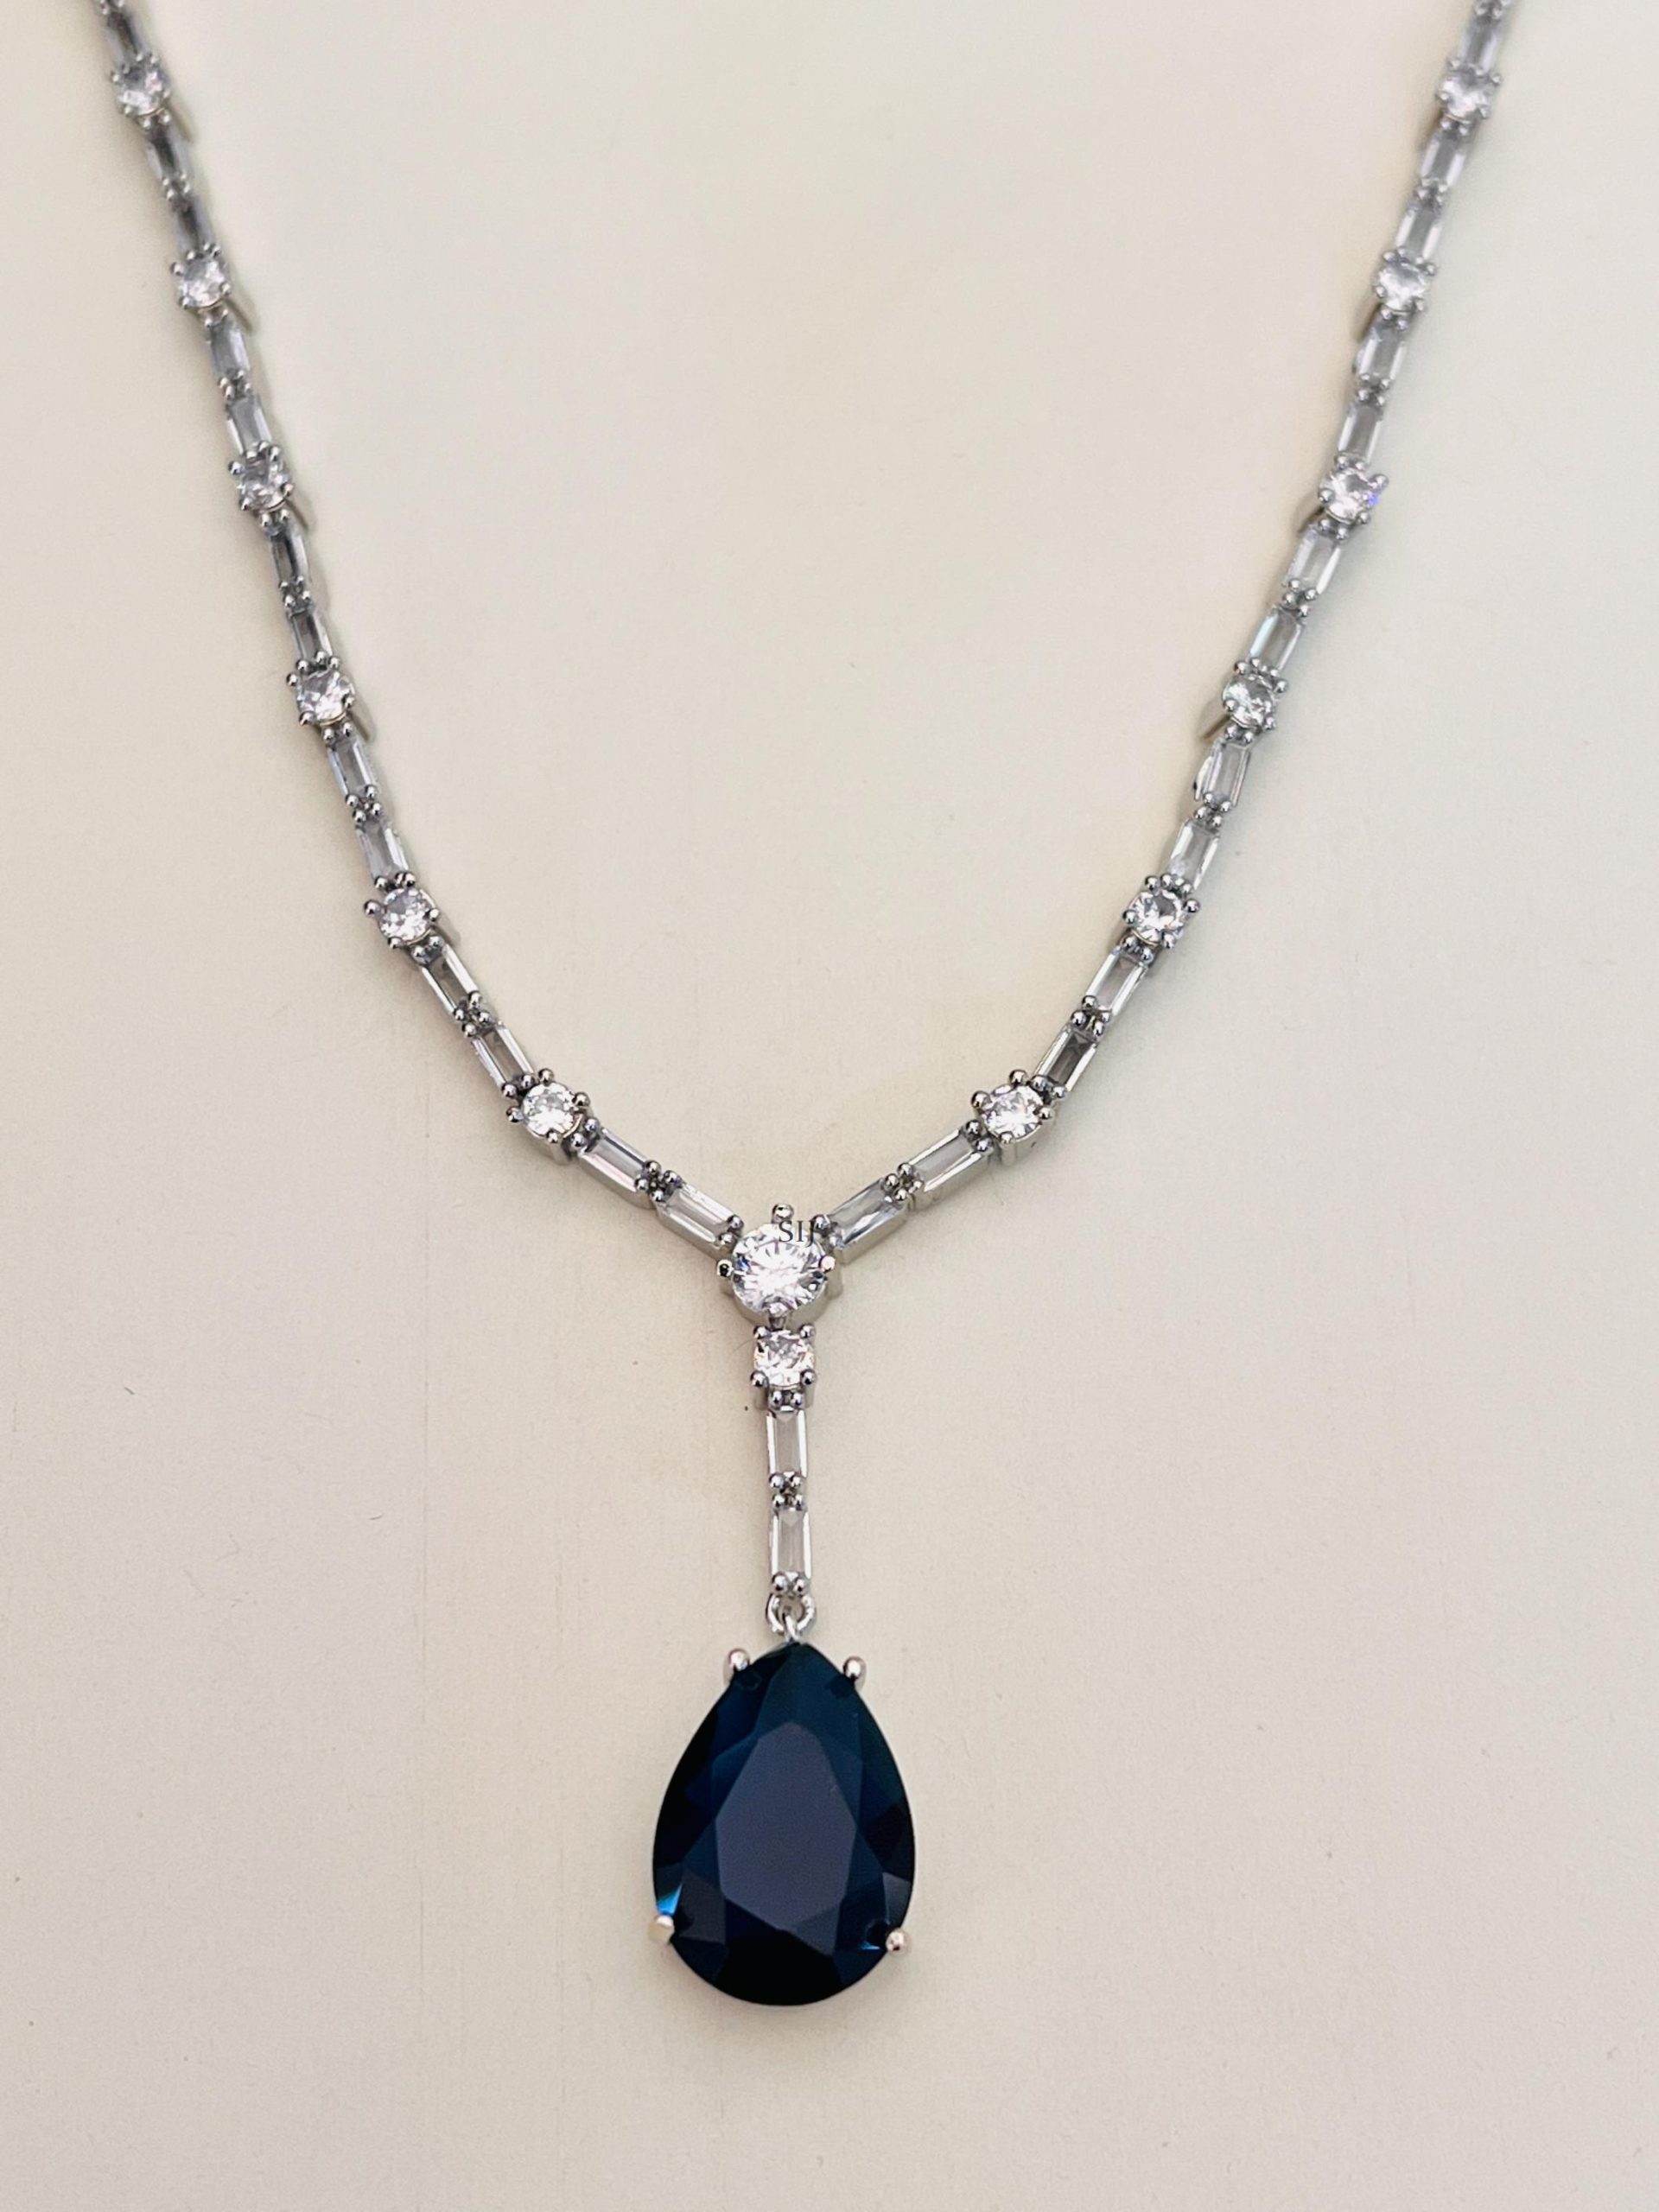 Silver Plated Single Line AD Stones Chain with Blue Stone Pendant